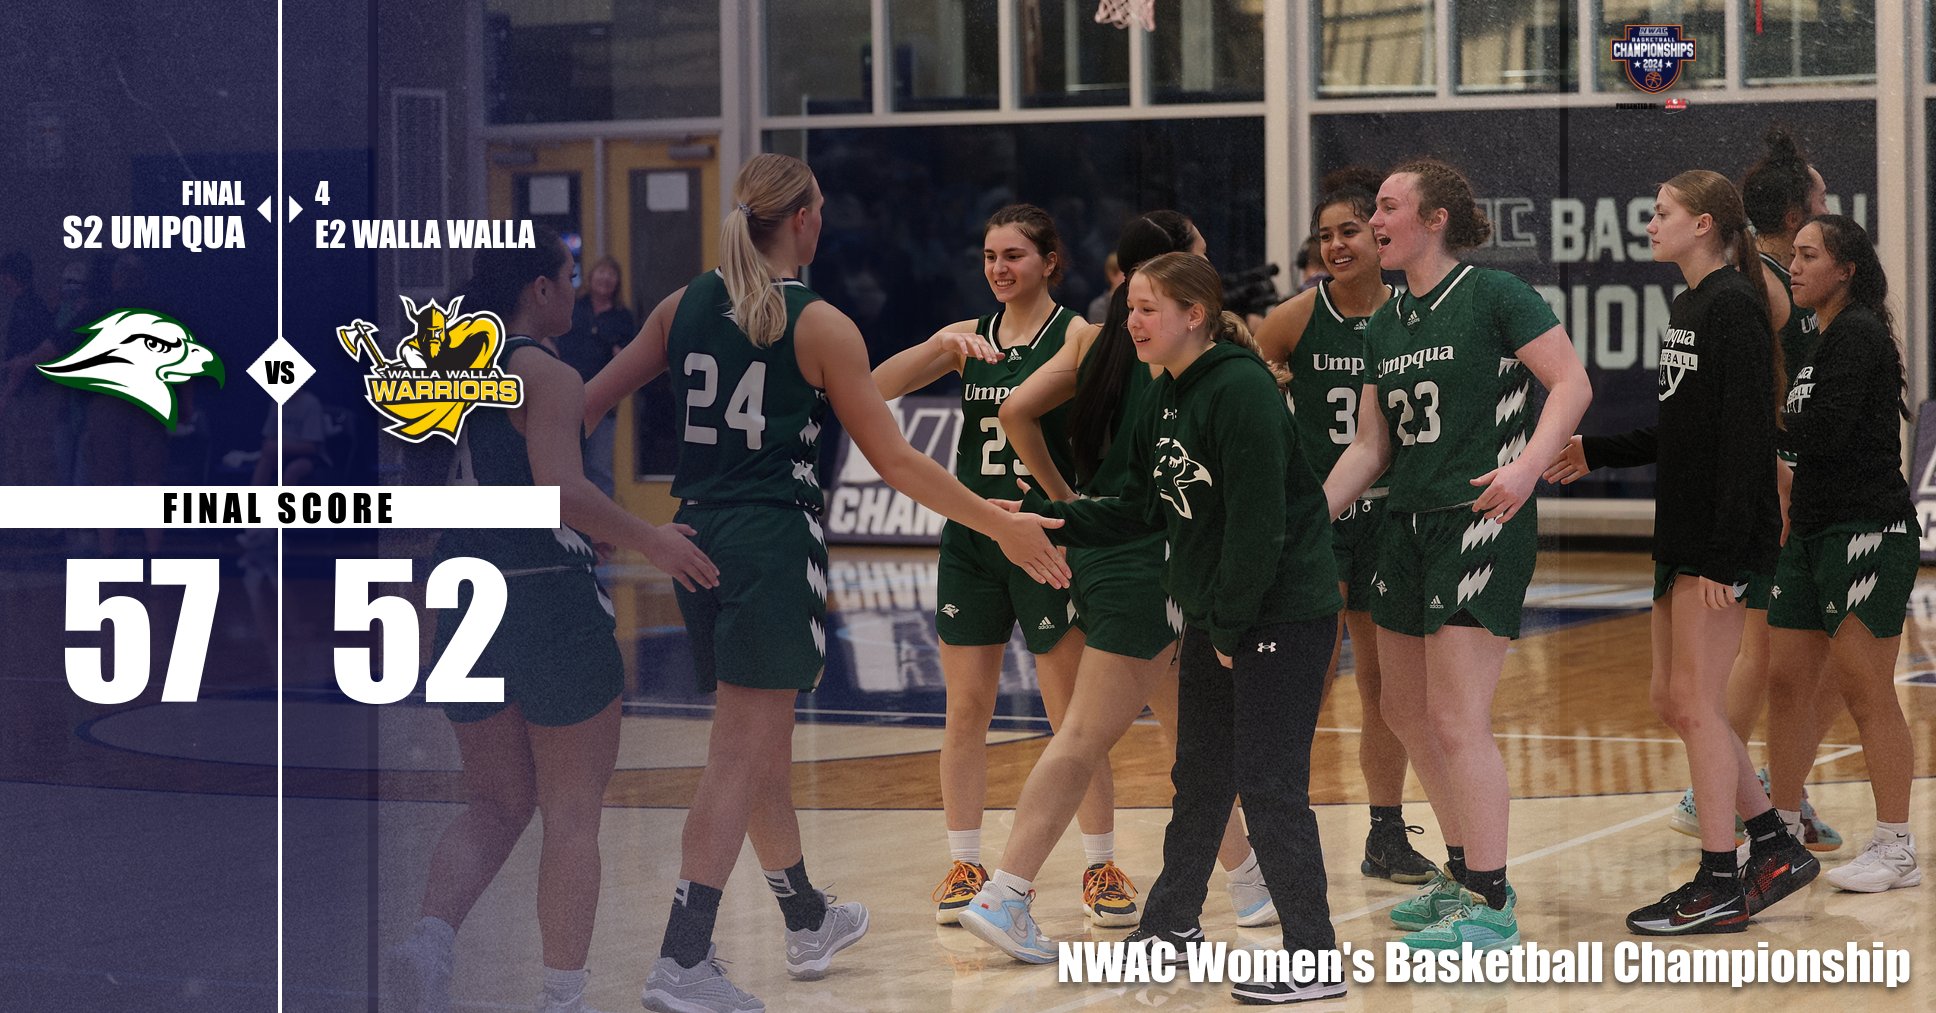 Riverhawks Down Warriors 57-52 to Reach NWAC Championship Game